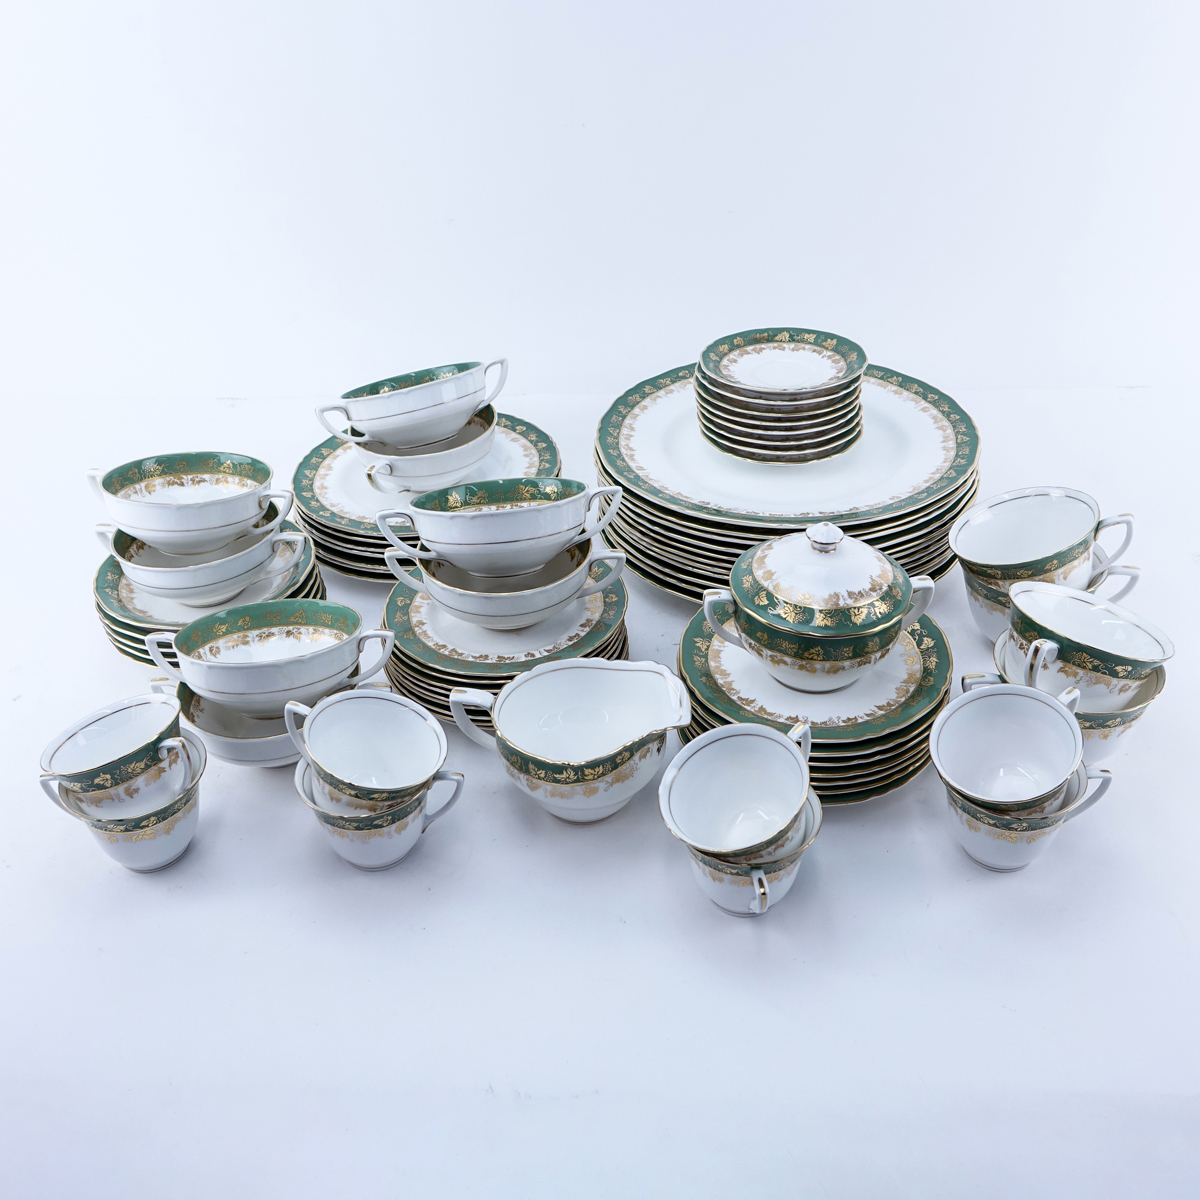 Sixty Nine (69) Piece Royal Worcester Arundel Green Partial Dinnerware Set. Includes: 11 dinner plates 10-3/4", 7 salad plates, 8 handled soup cups, 7 saucers, 4 cups, 5 saucers, 8 demitasse cups, 8 saucers, 9 bread and butter plates, creamer and sugar bo